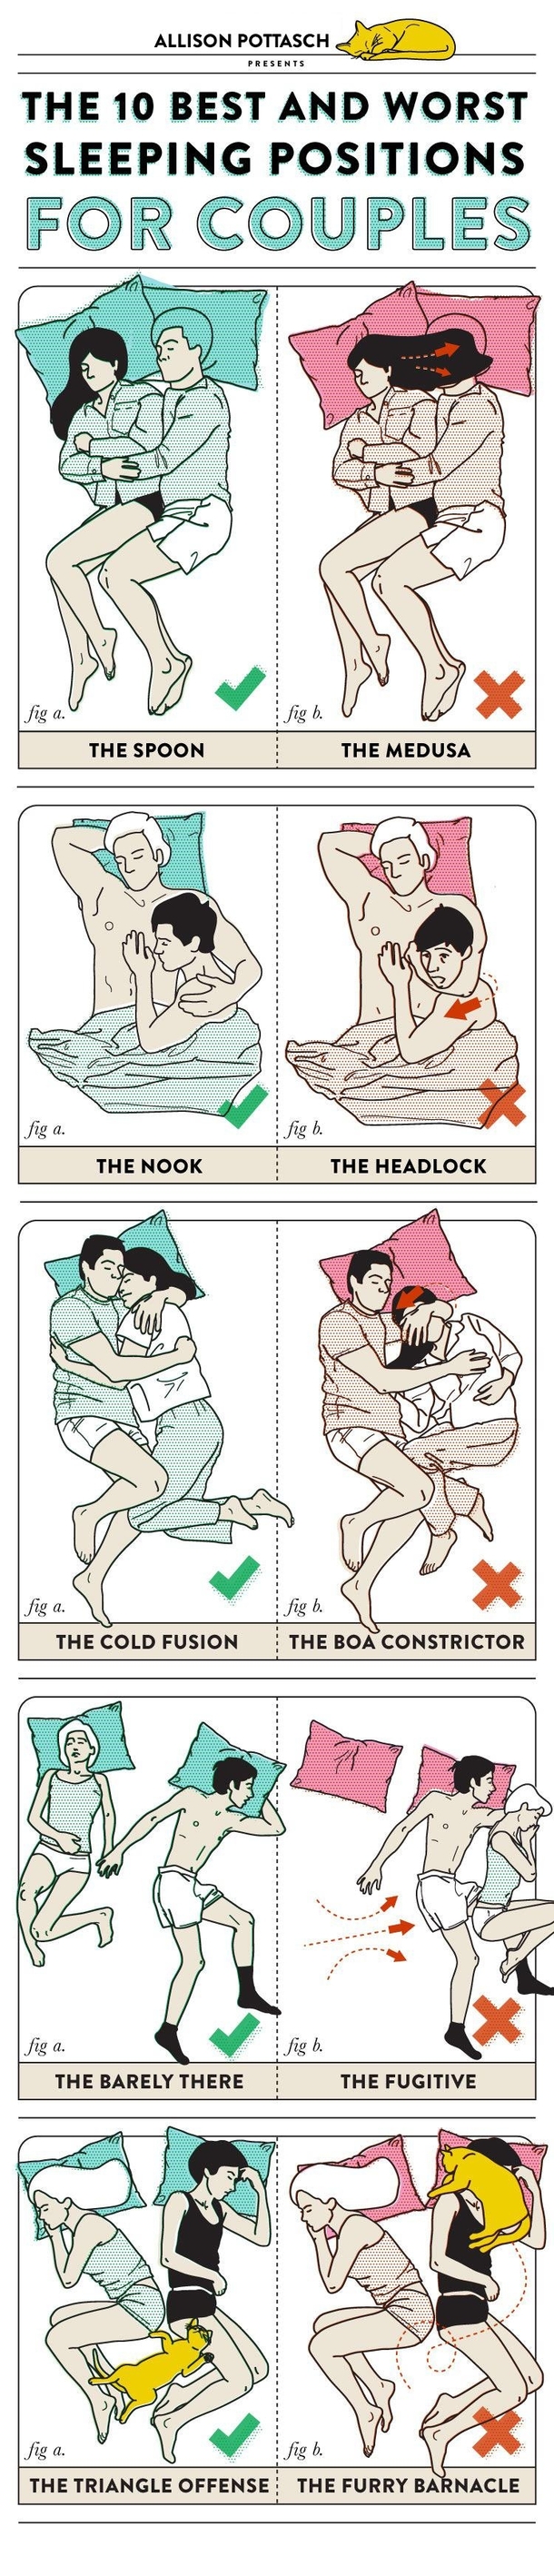 Sleep positions for couples theory vs reality